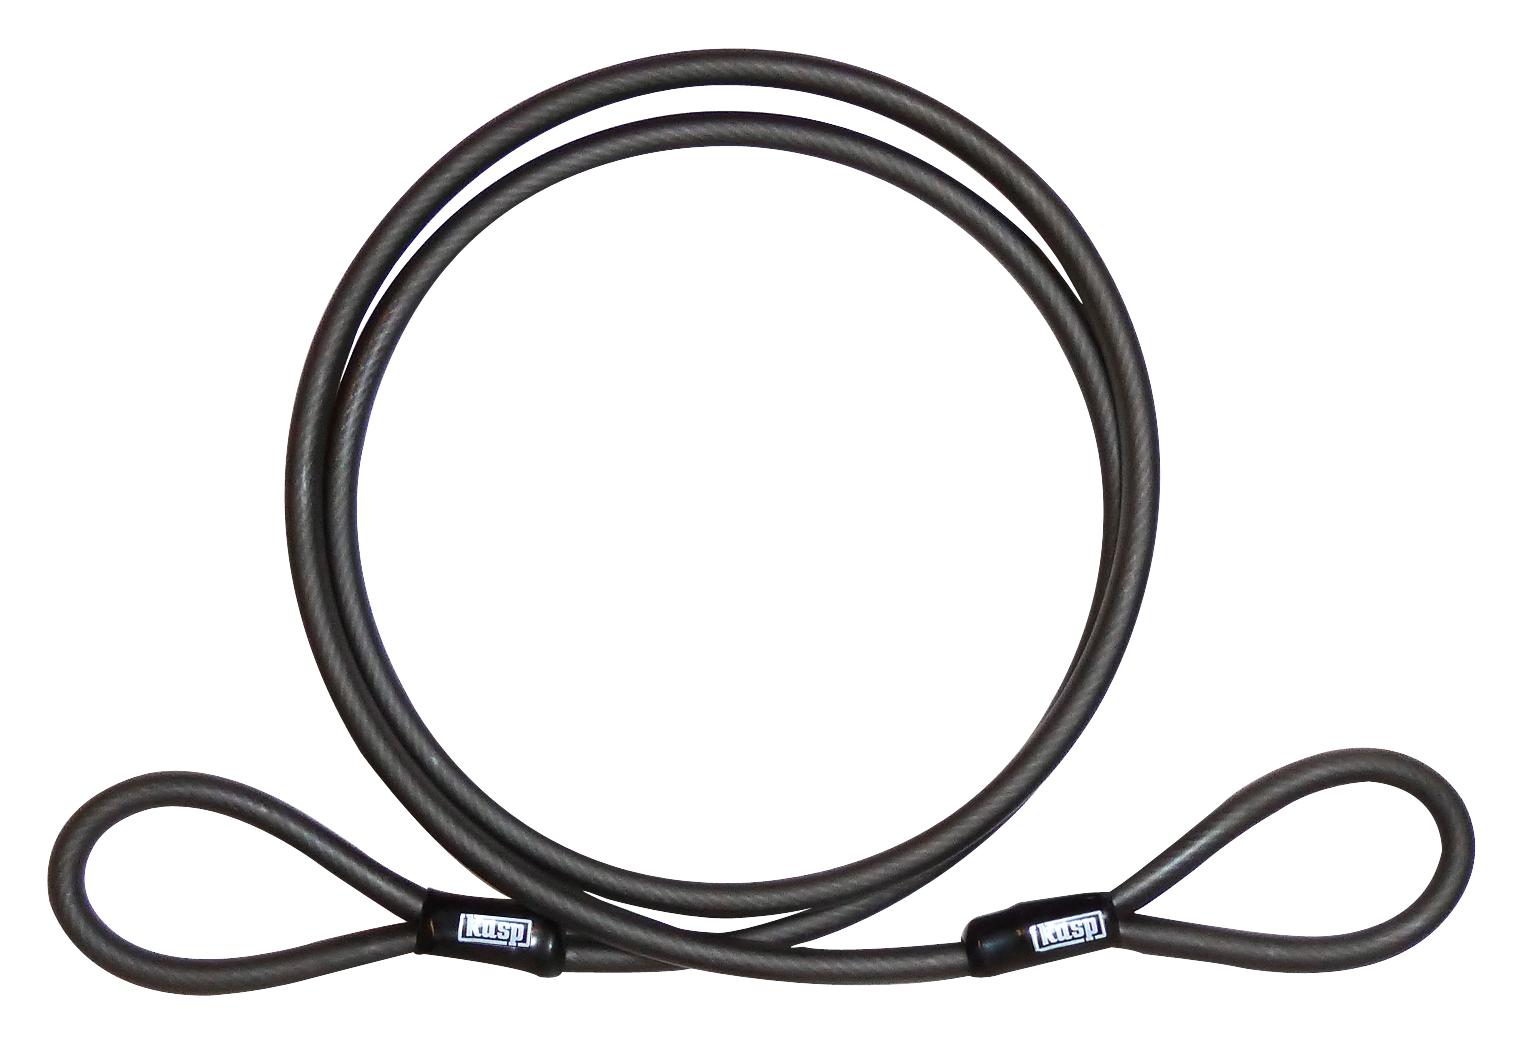 K4551220D DOUBLE LOOP SECURITY CABLE, 12 X 2000MM KASP SECURITY